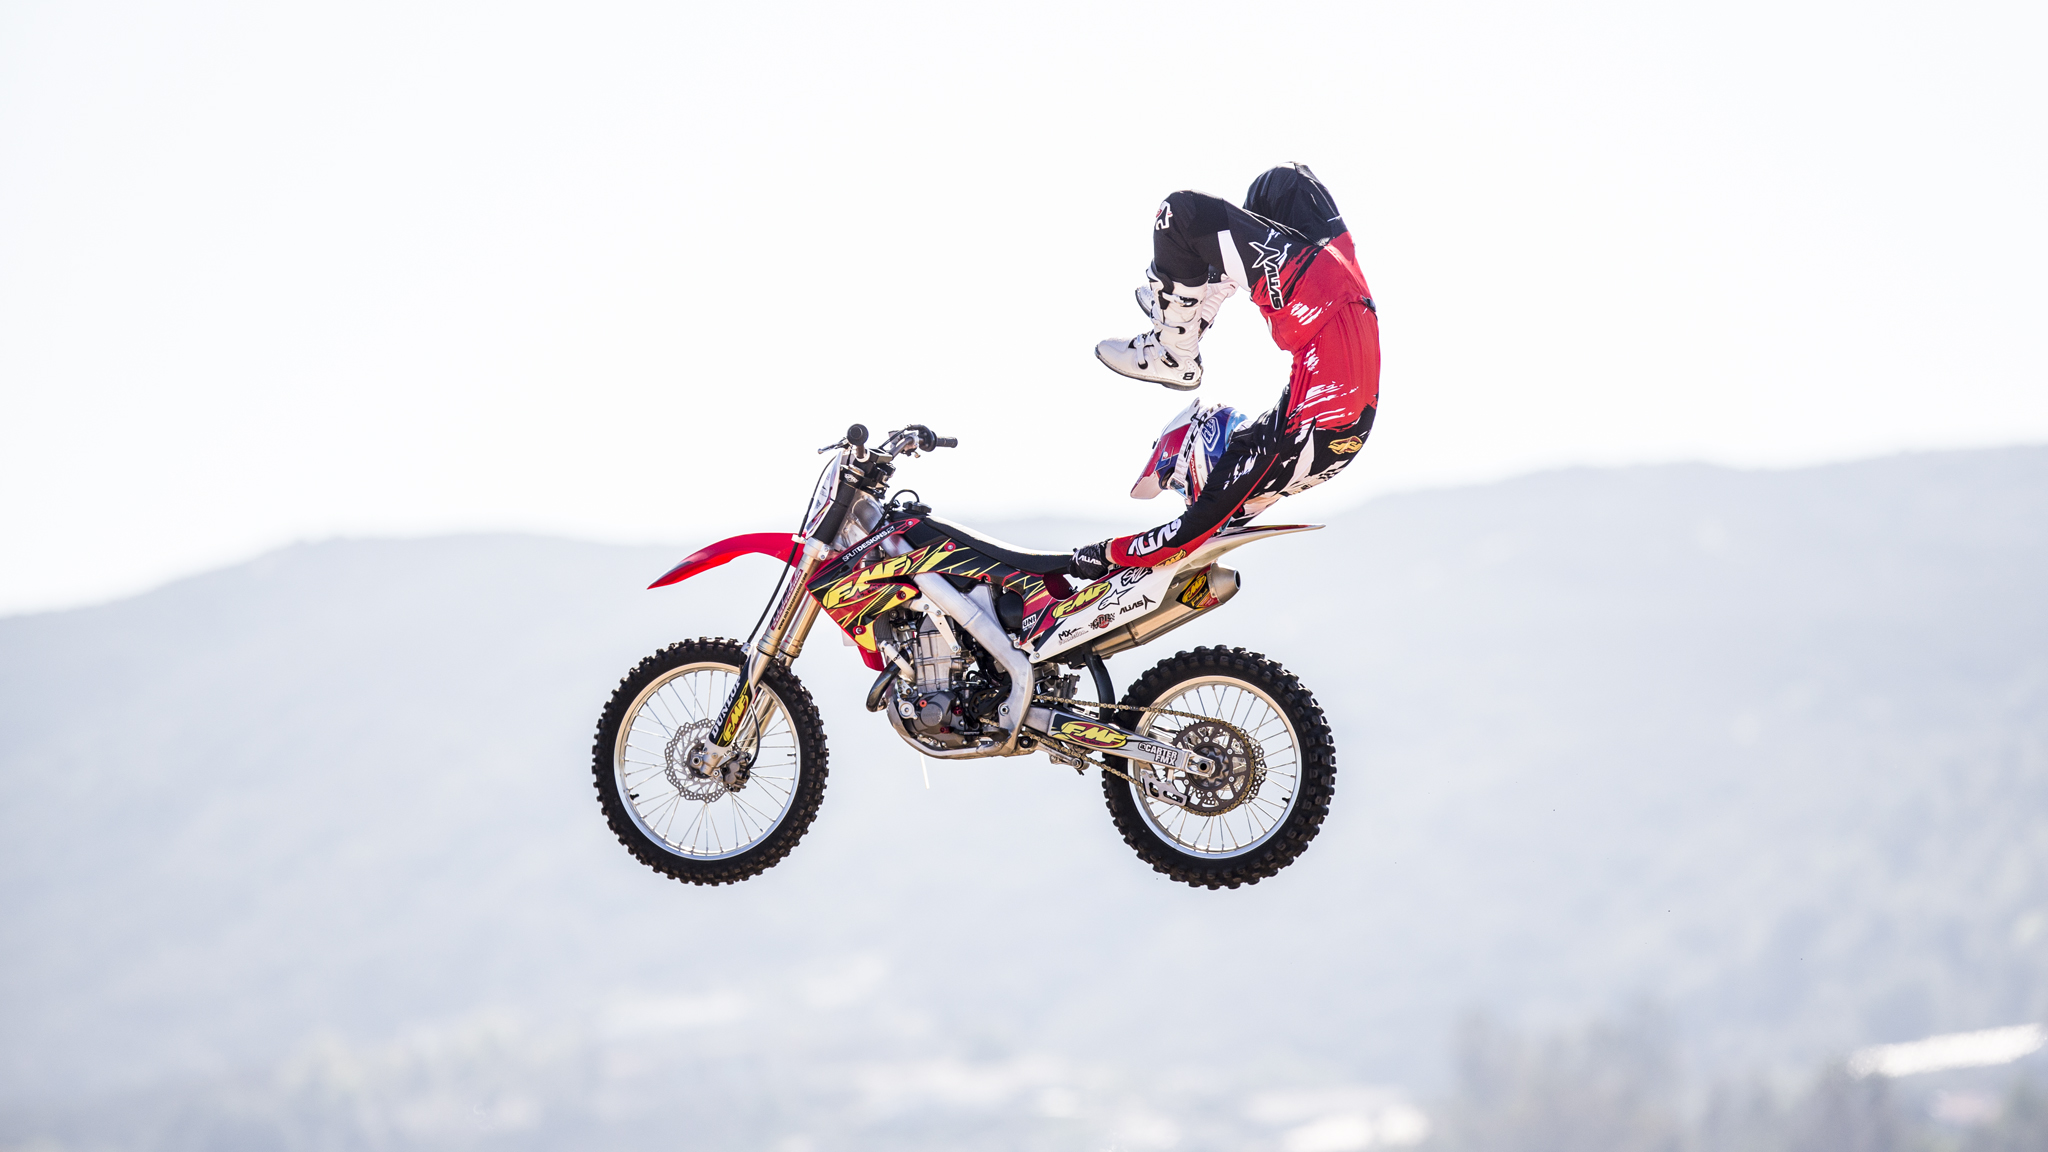 James Carter works his way back in FMX, targets big year in 2014